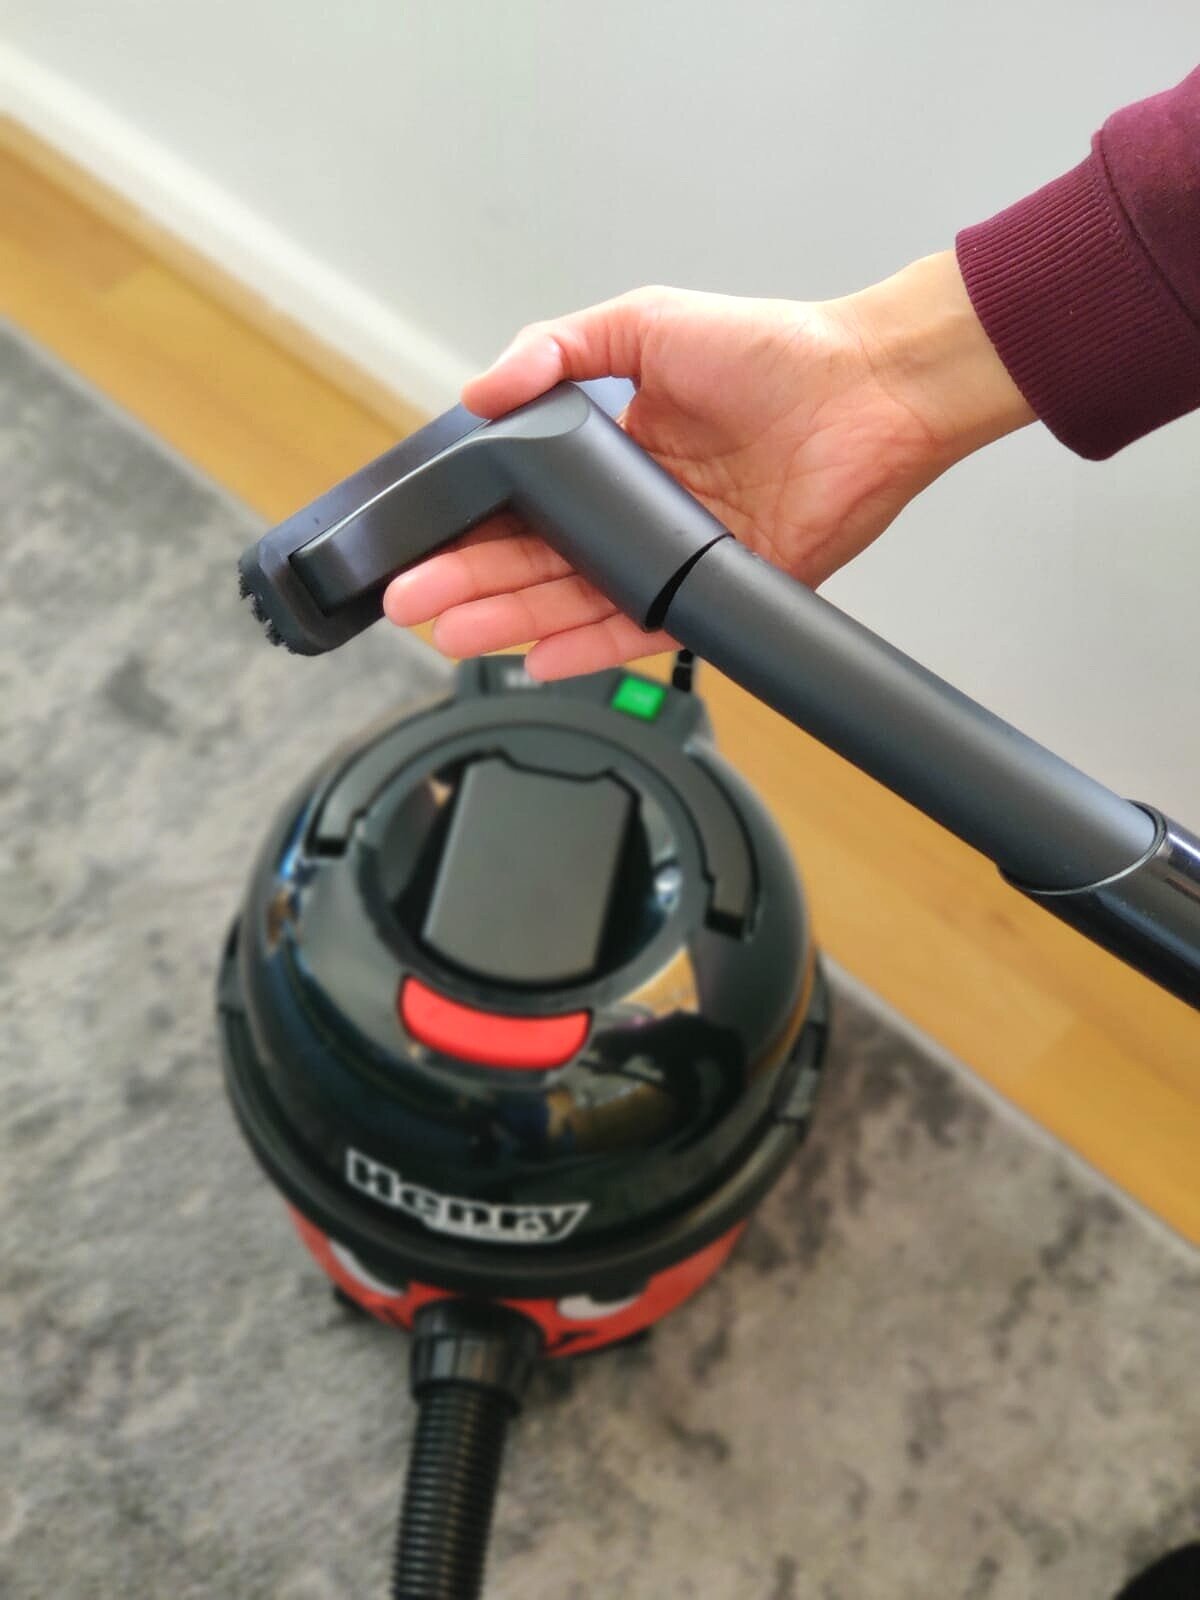 Henry Cordless Vacuum Review